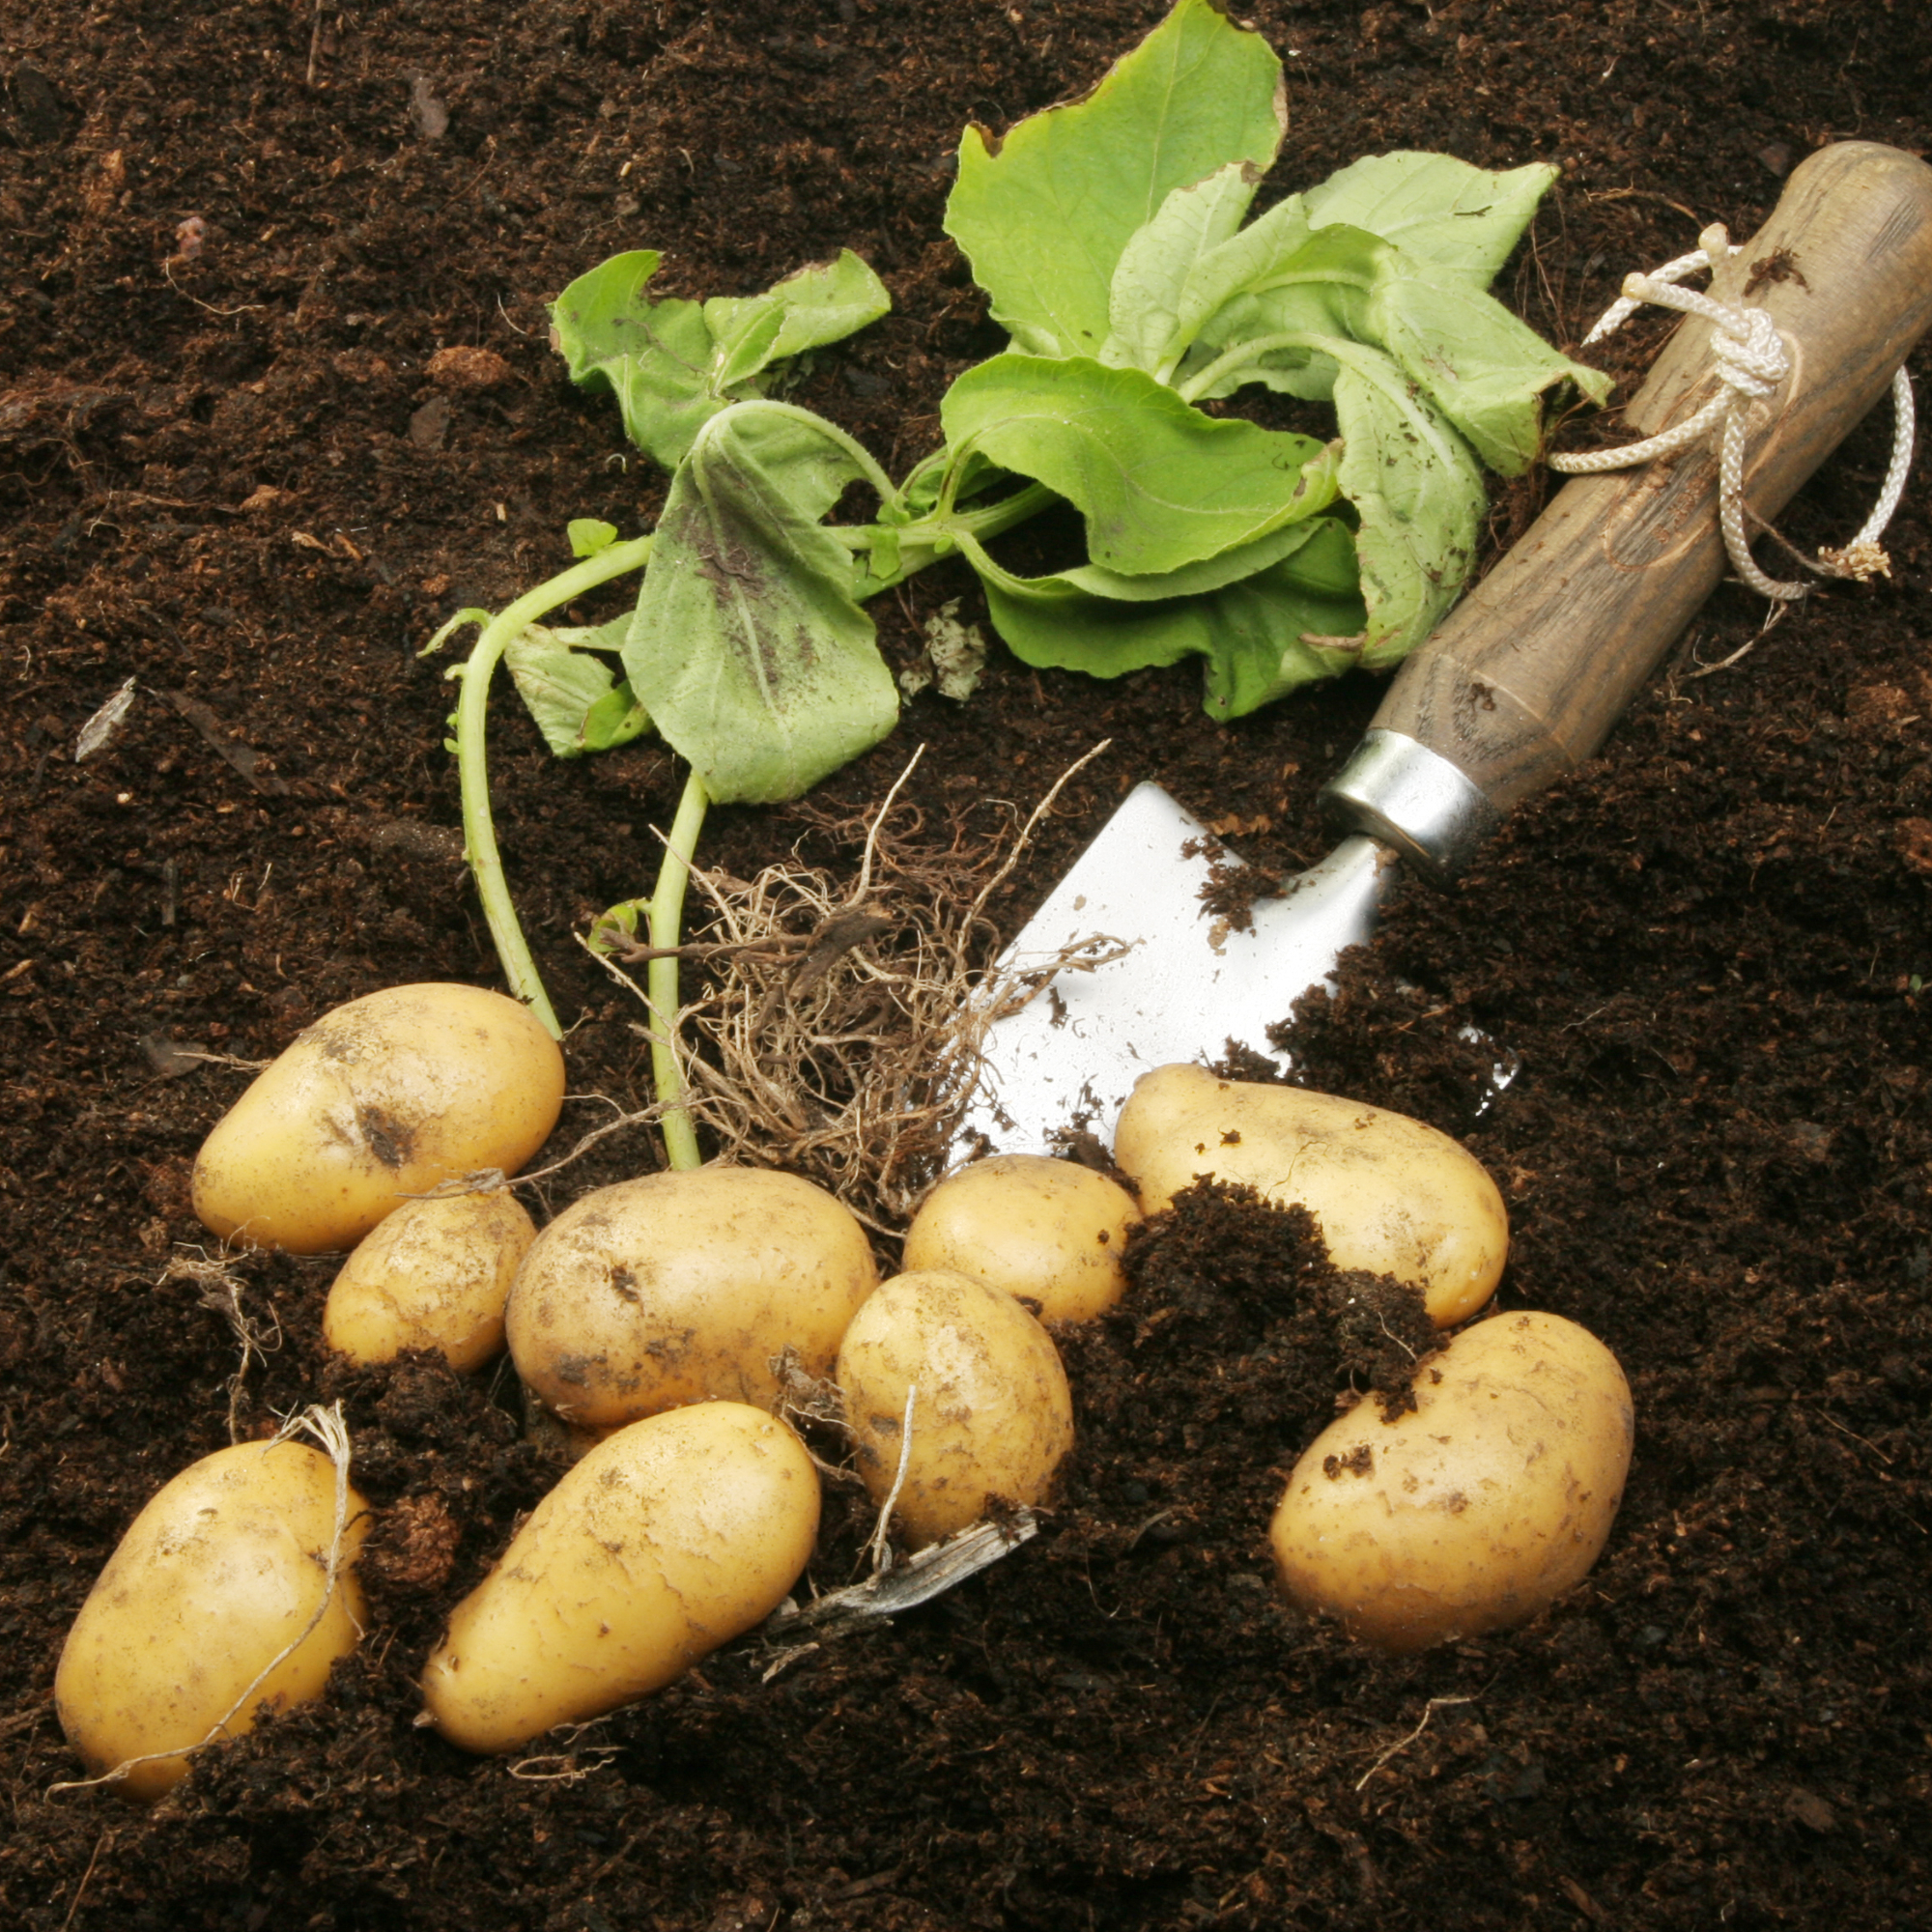 Potatoes freshly dug up from the ground